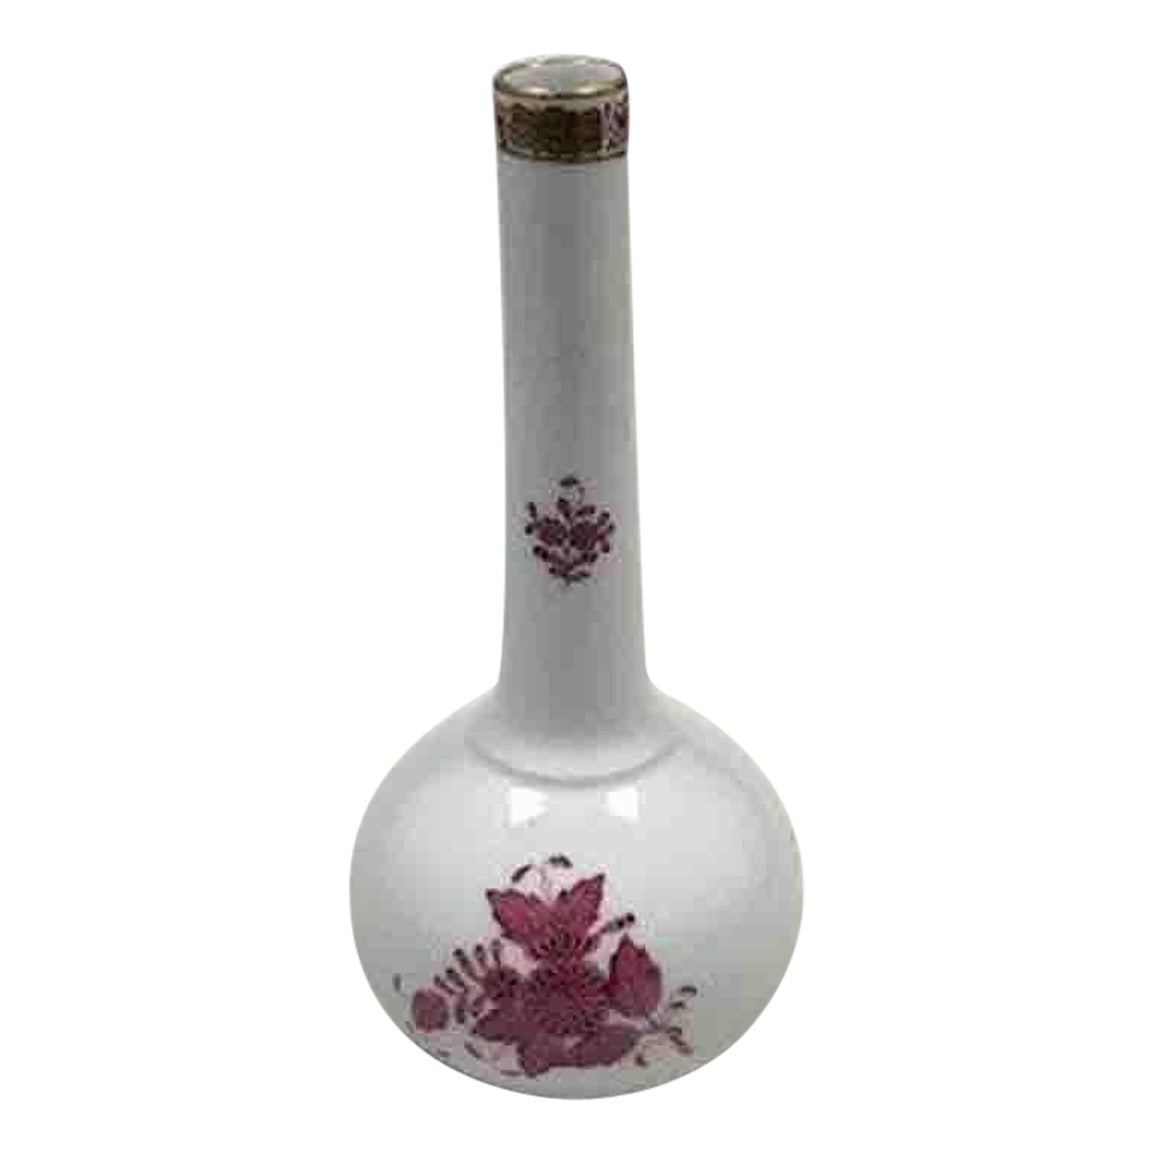 Herend Hungary Apponyi Purple Vase No 7074 For Sale